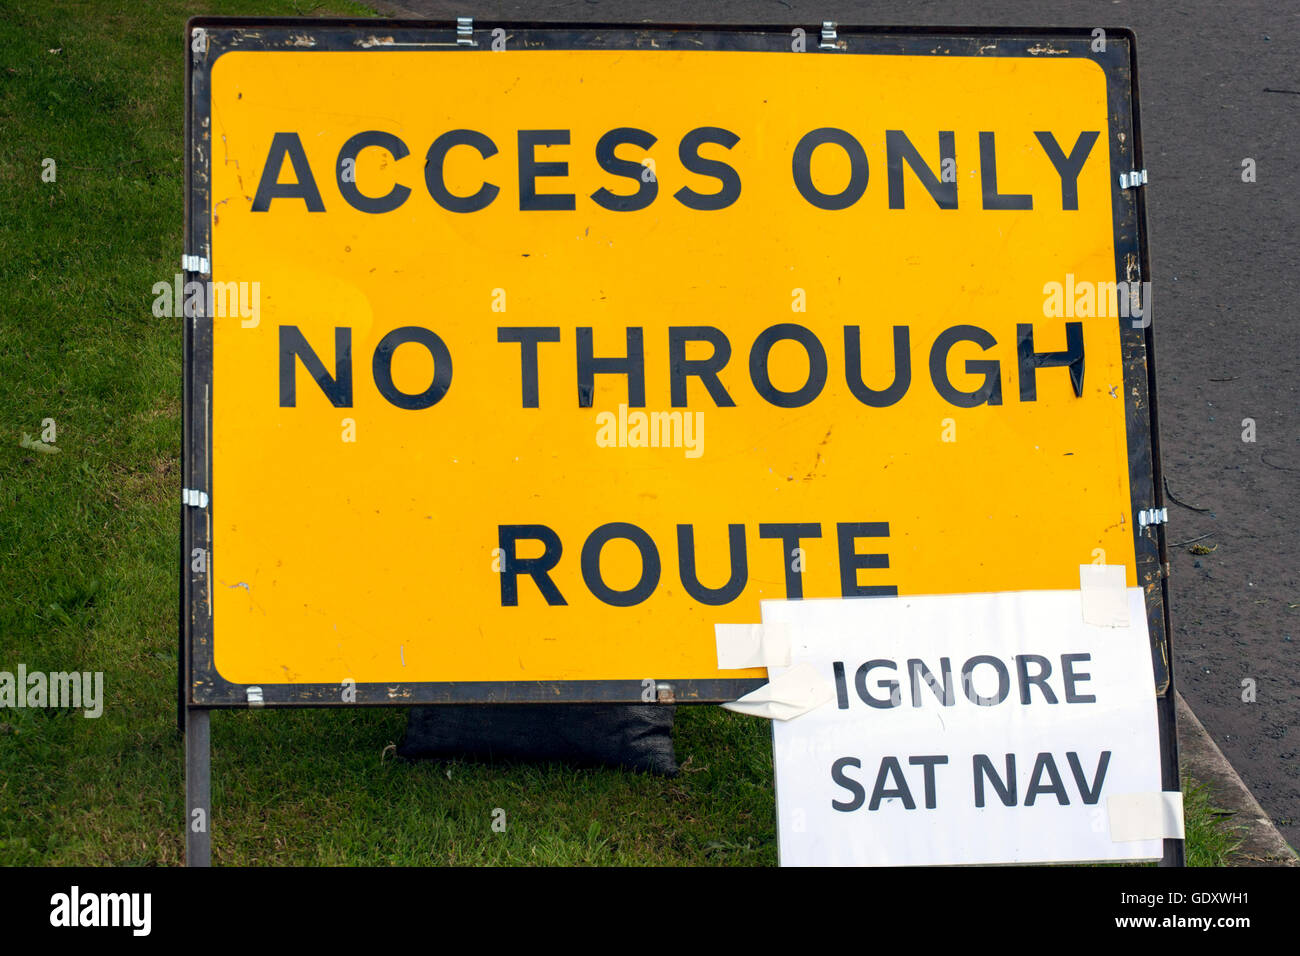 Access Only Ignore Sat Nav Stock Photo